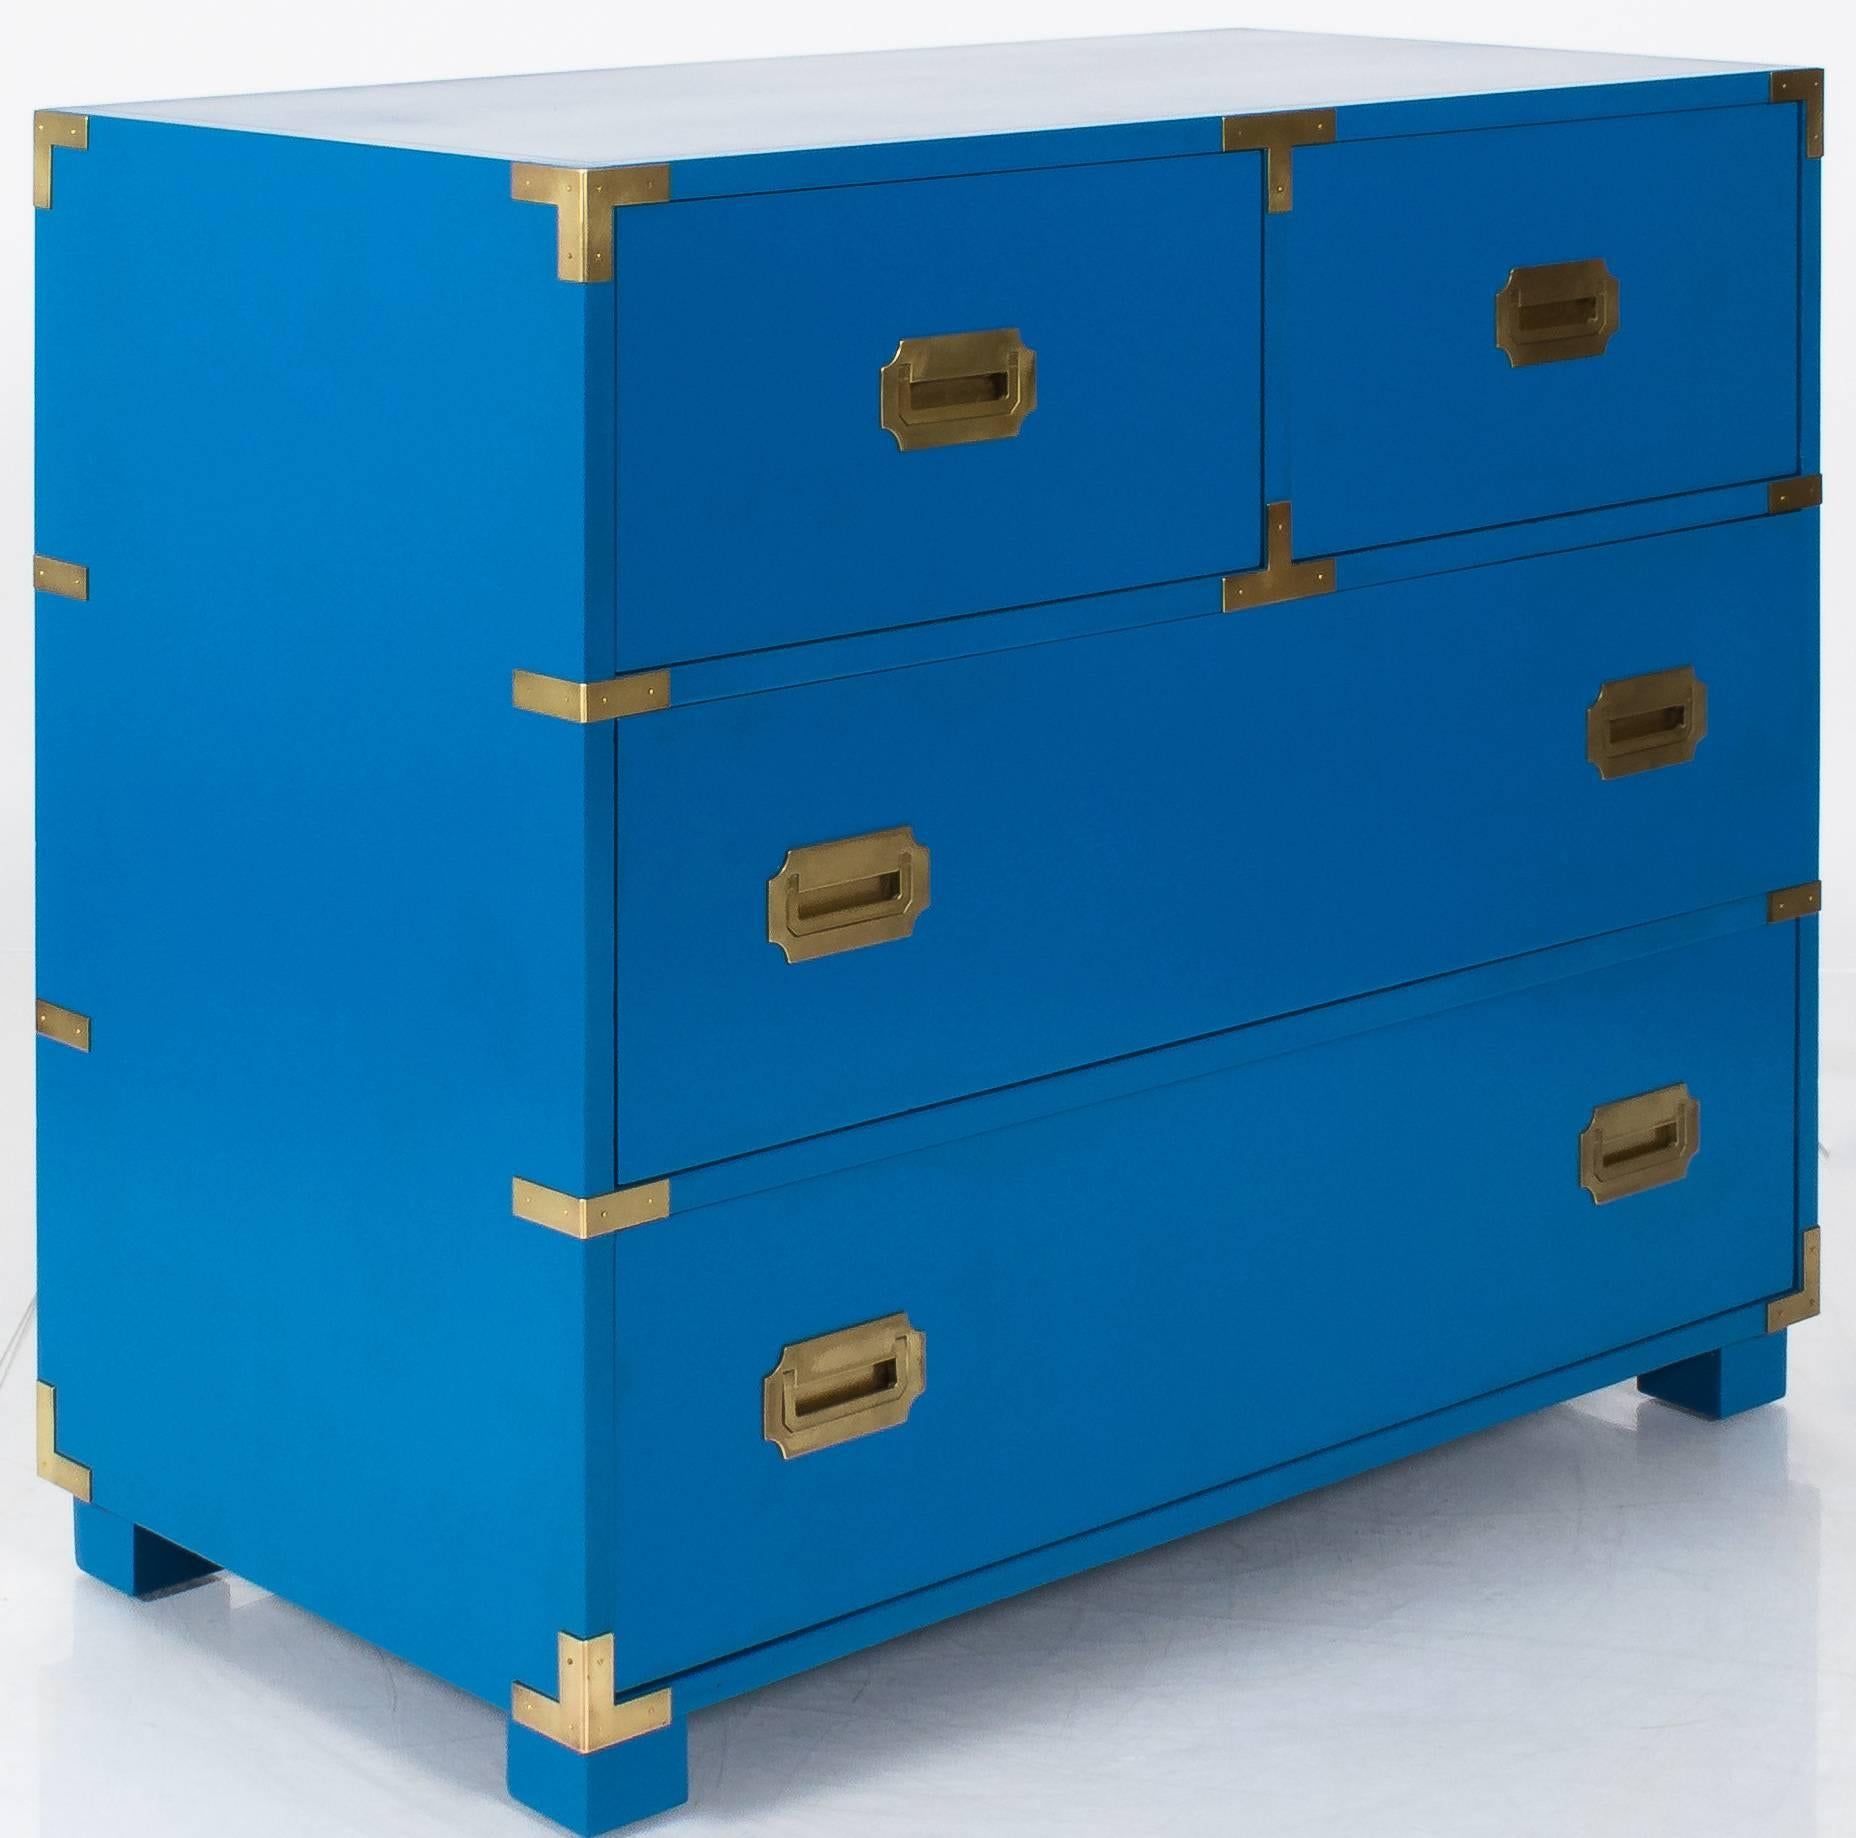 1970s Campaign dresser by Baker. Newly refinished in satin blue (BM 'Old Glory'). Brass hardware is newly hand polished. Dresser retains metal Baker tag in upper left drawer. Four drawer style. Upper left drawer has divided compartment (as shown).